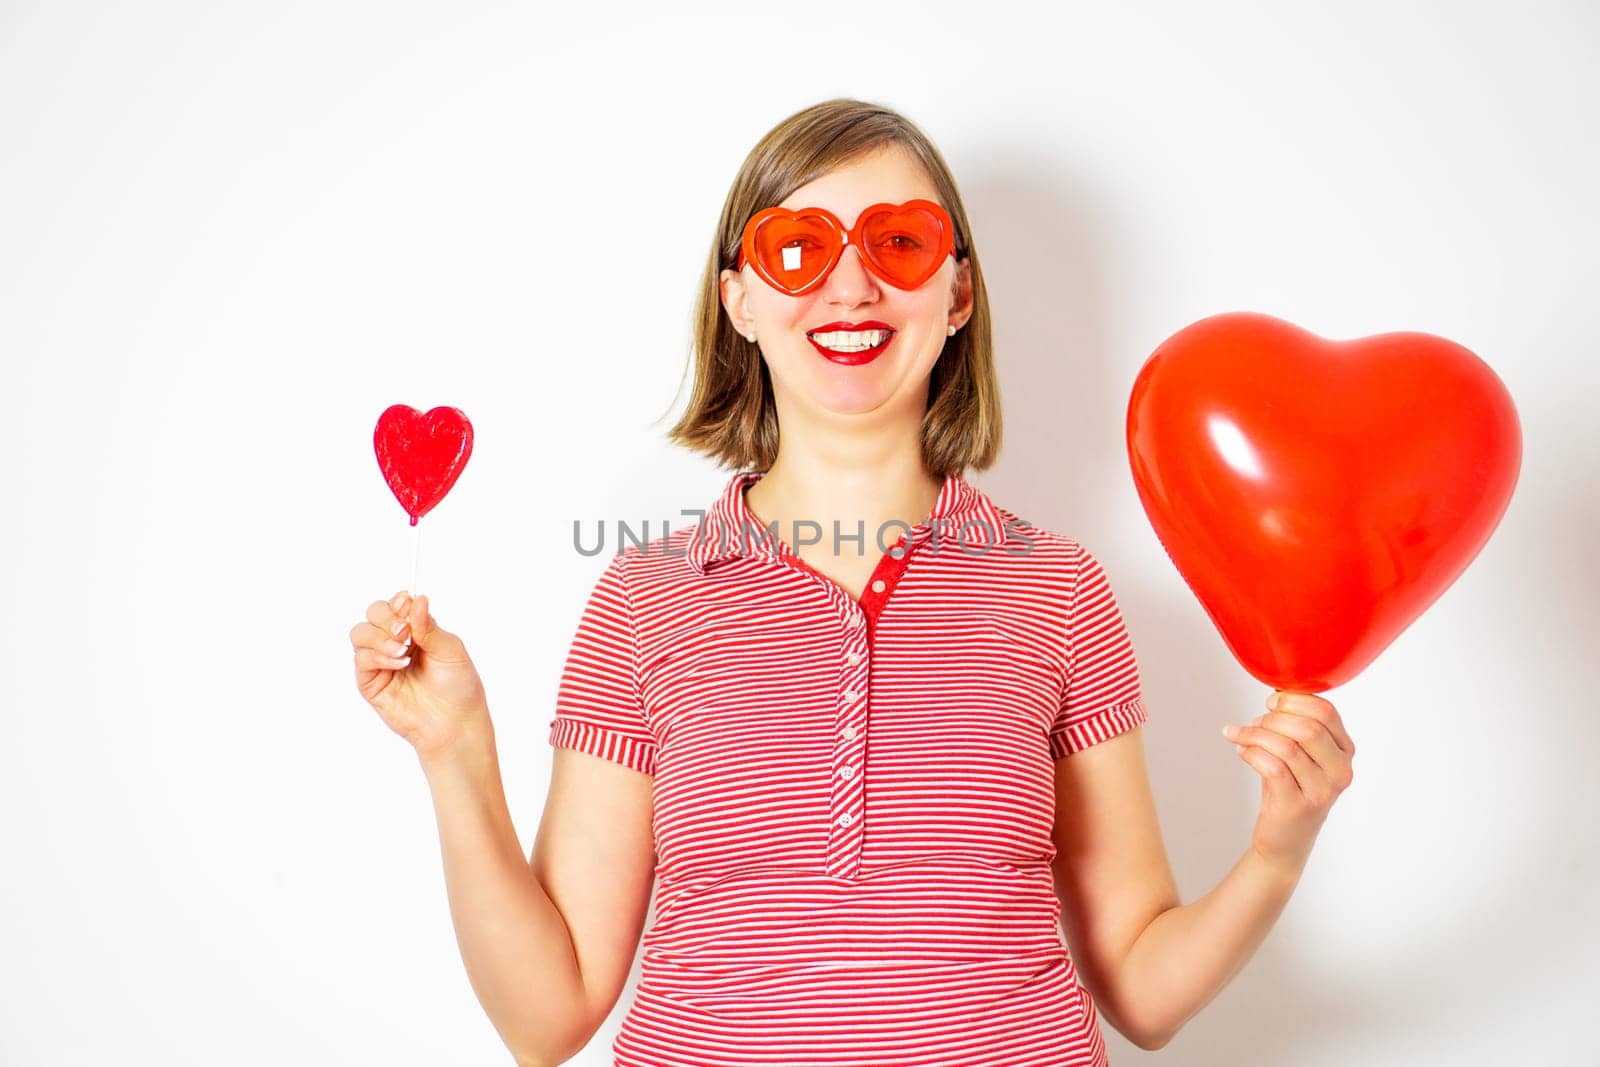 Portrait of the beautiful smiling woman in red sunglasses holding in her hands a red heart balloon and a red heart lollipop for Valentines Day. High quality photo